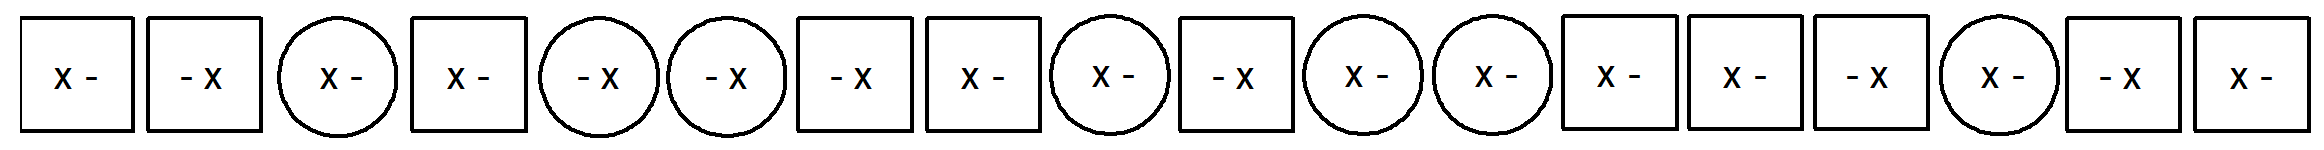 square with X - in it; square with - X in it; circle with X - in it; square with X - in it; circle with - X in it; circle with - X in it; square with - X in it; square with X - in it; circle with X - in it; square with - X in it; circle with X - in it; circle with X - in it; square with X - in it; square with X - in it; square with - X in it; circle with X - in it; square with - X in it; square with X - in it;